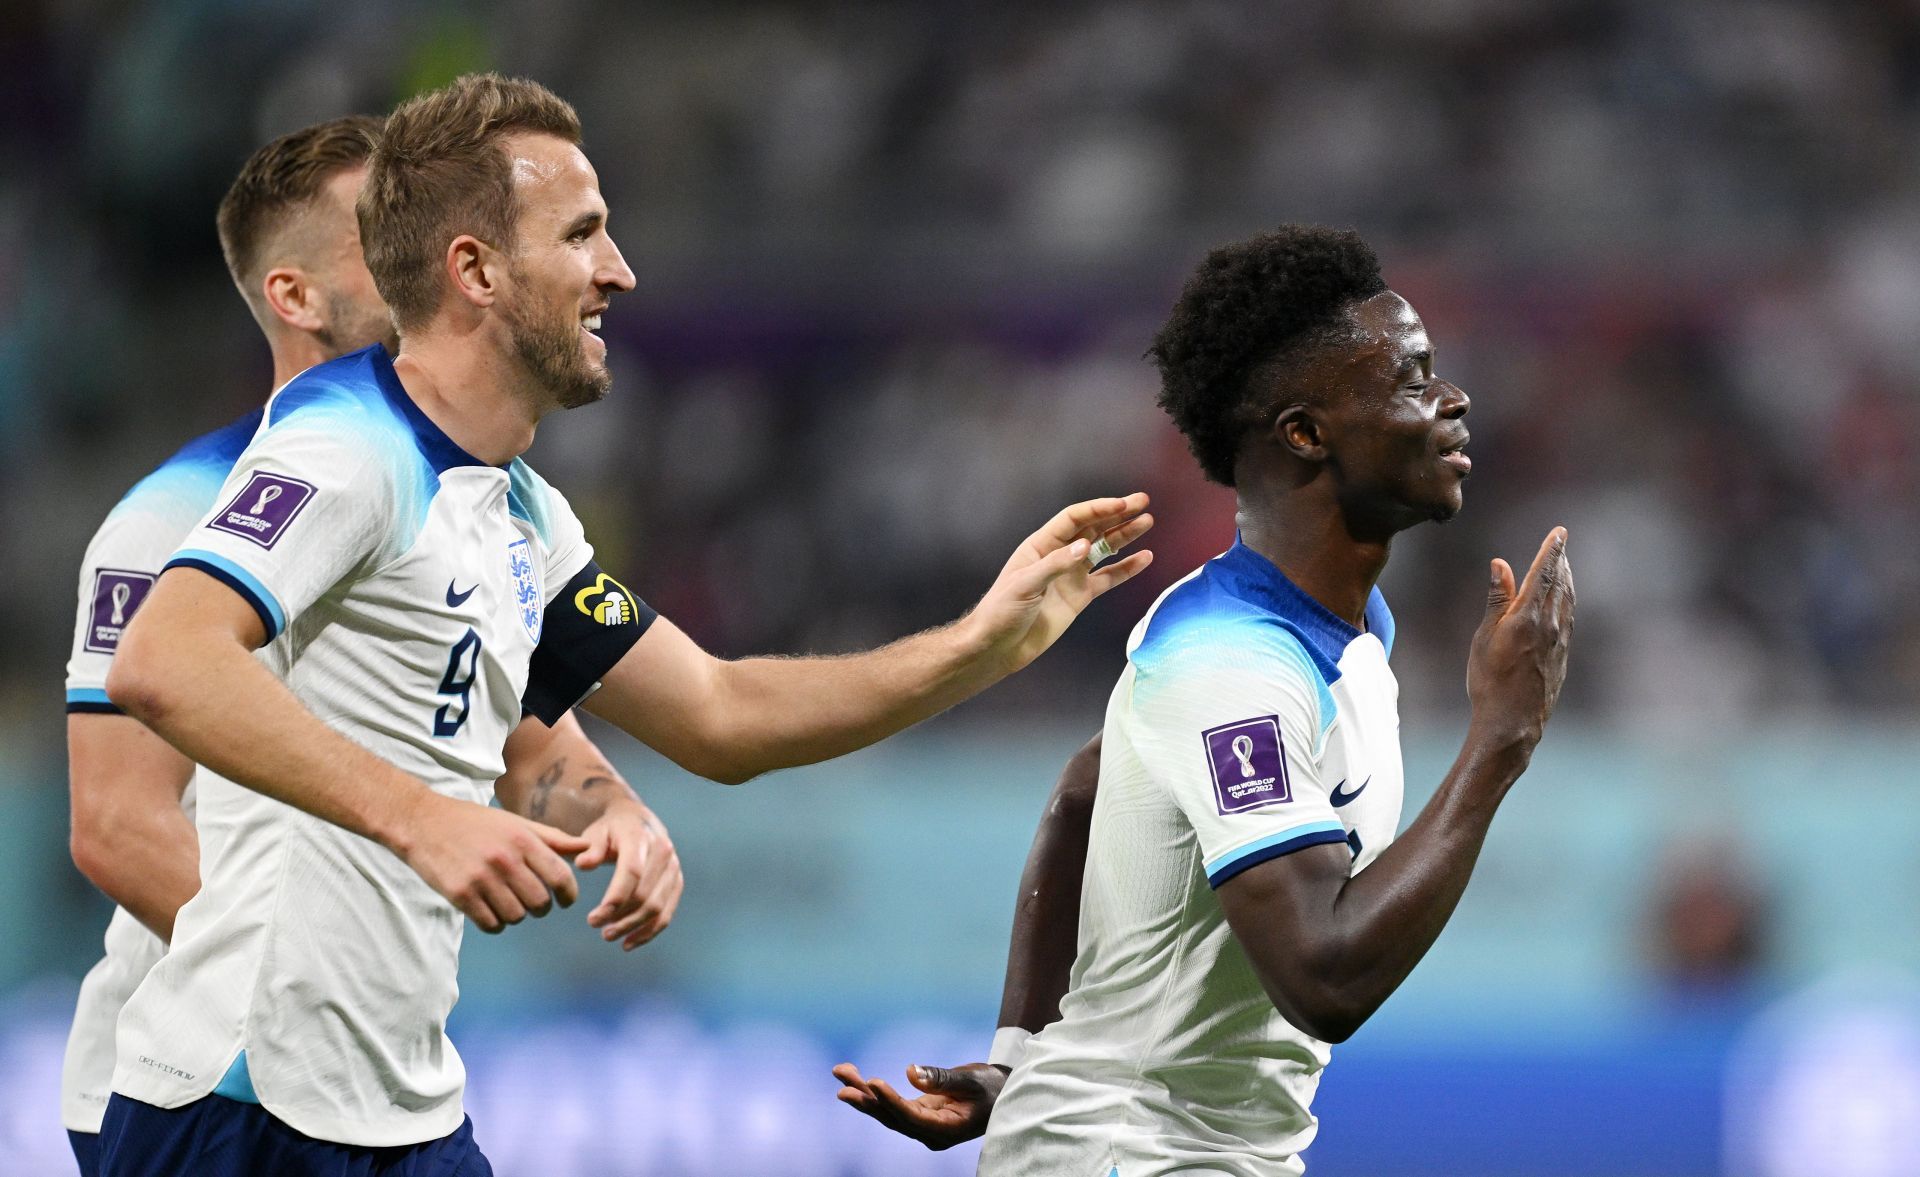 Saka scored two sublime strikes on his first FIFA World Cup debut